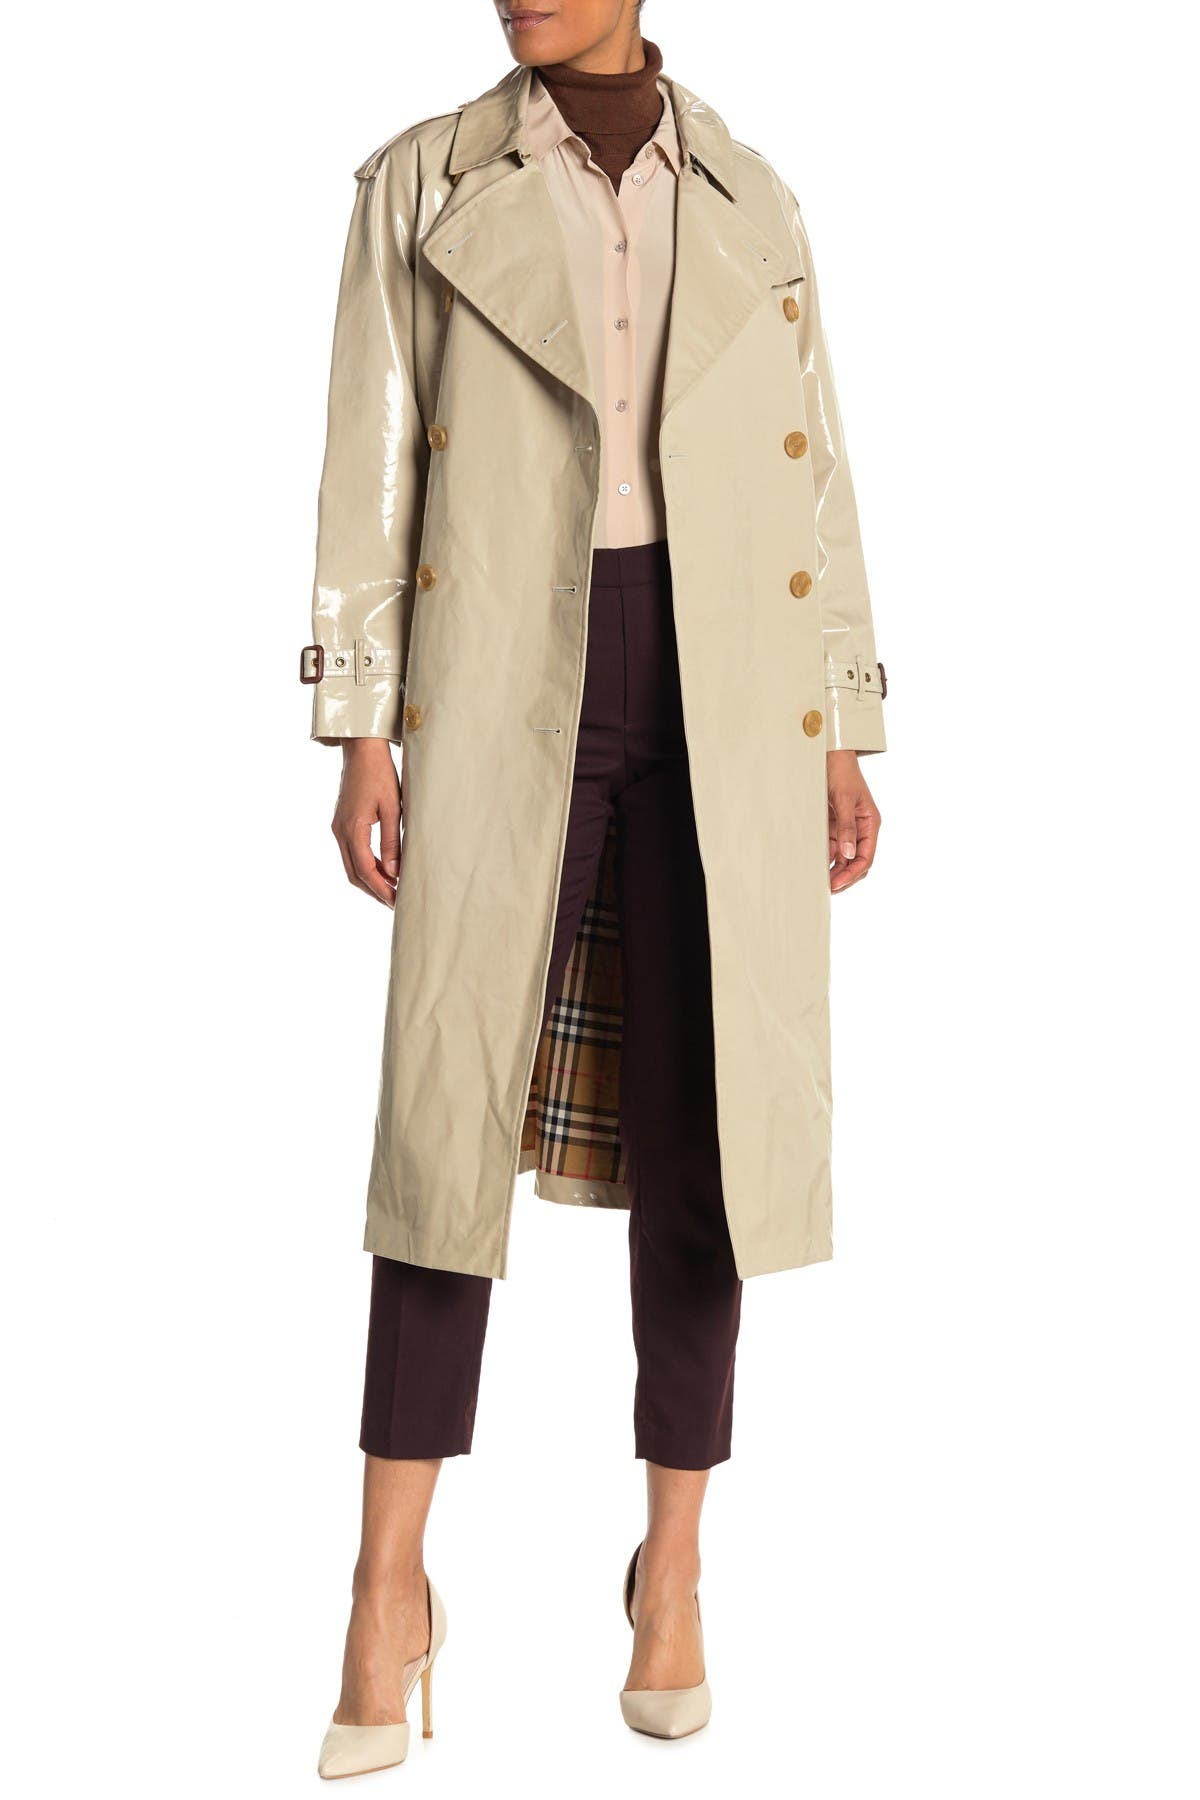 Burberry | Double Breasted Trench Coat | Nordstrom Rack